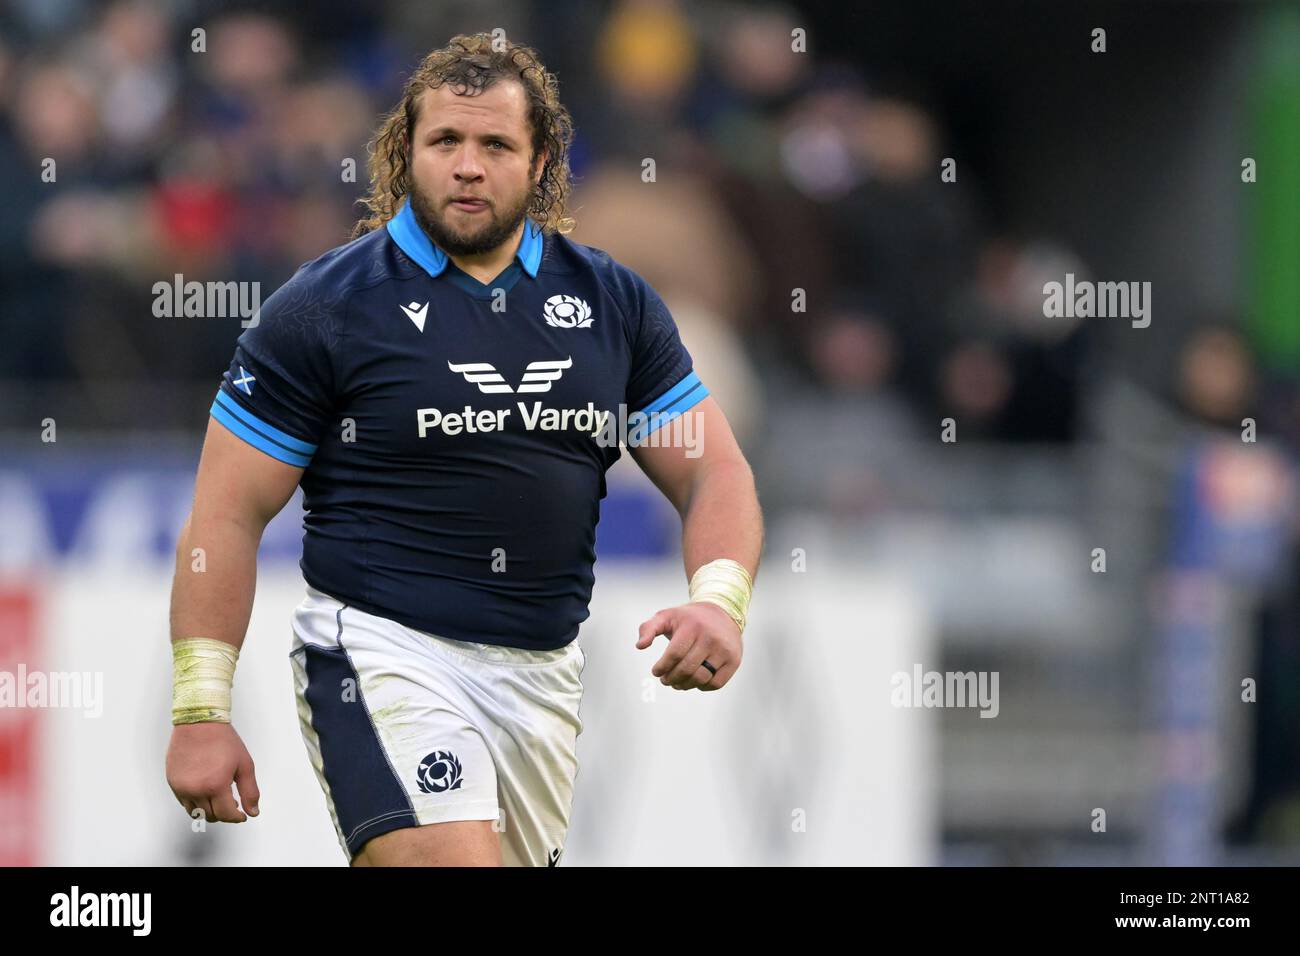 Paris, France. 26/02/2023, PARIS - Pierre Schoeman of Scotland during the Guinness Six Nations Rugby match between France and Scotland at Stade de France on February 26, 2023 in Paris, France. AP | Dutch Height | GERRIT OF COLOGNE Stock Photo